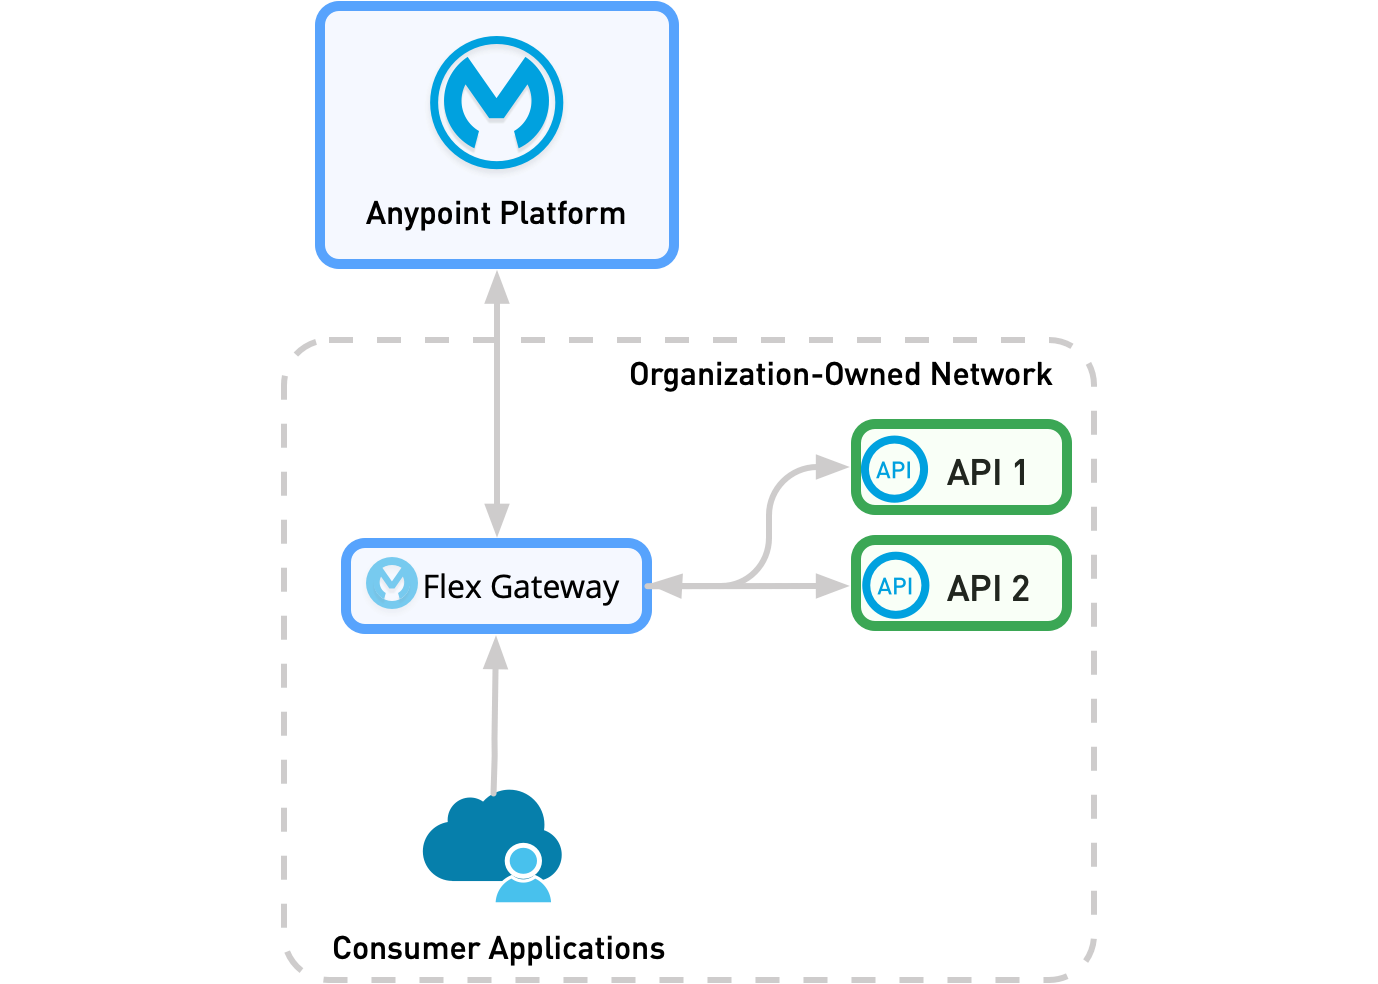 In a standalone deployment, Flex Gateway and the consumer applications are in the same network.